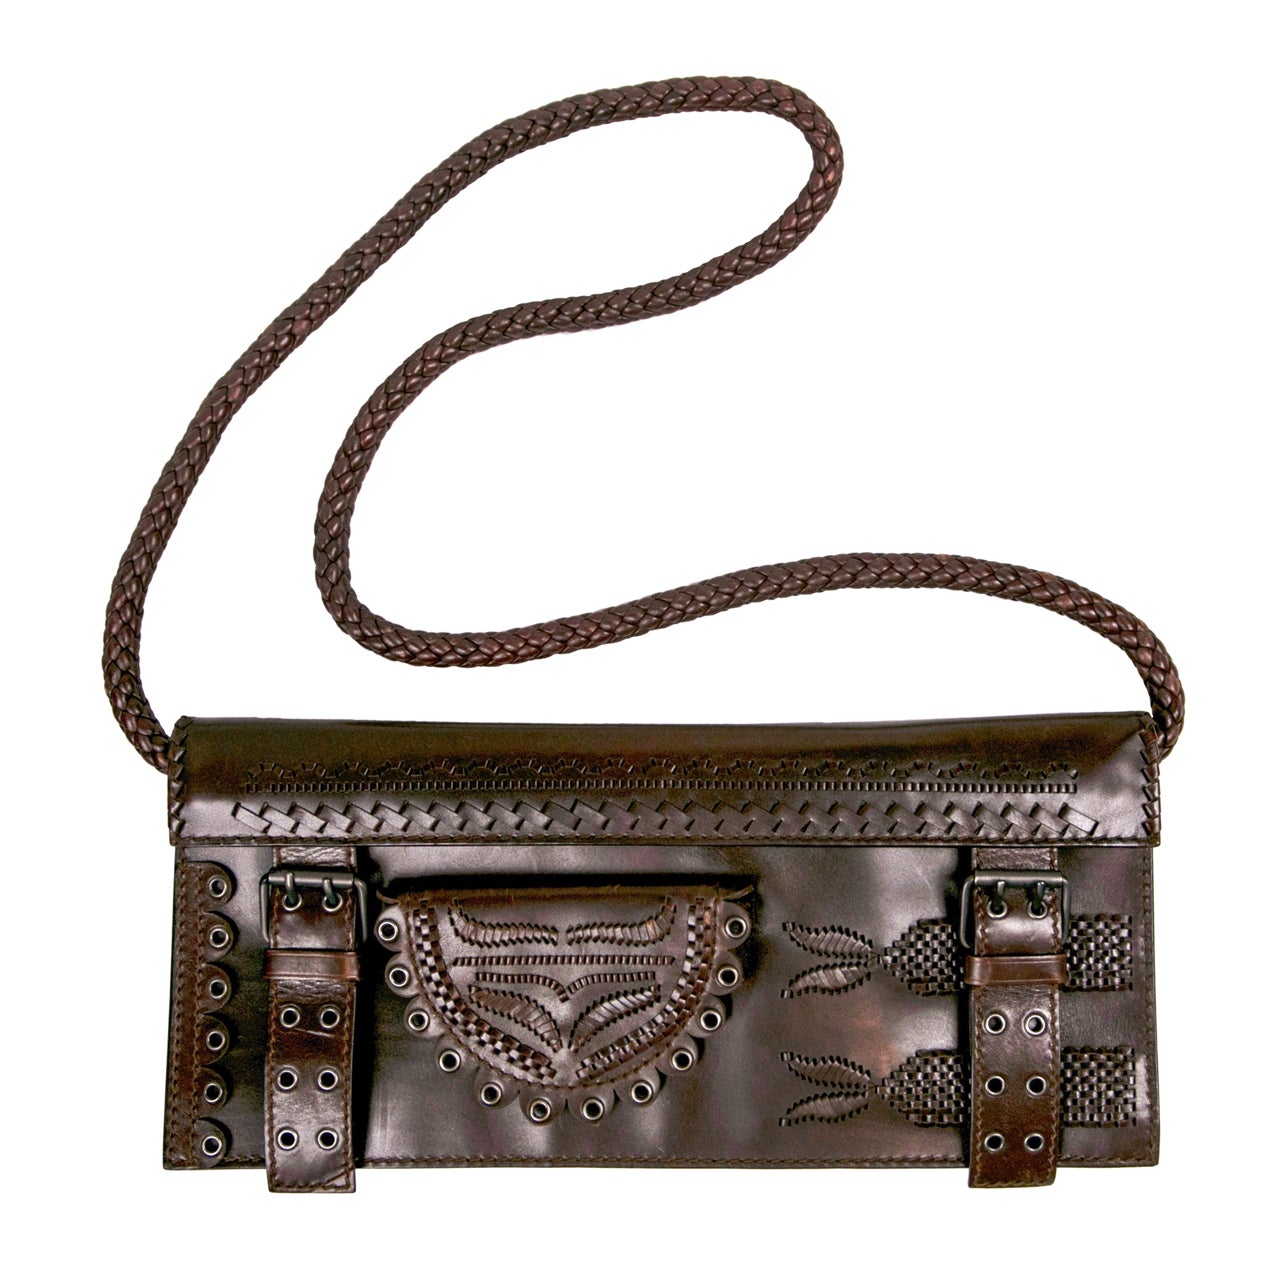 Embossed Leather YSL Brown Leather Purse Presented by Carol Marks